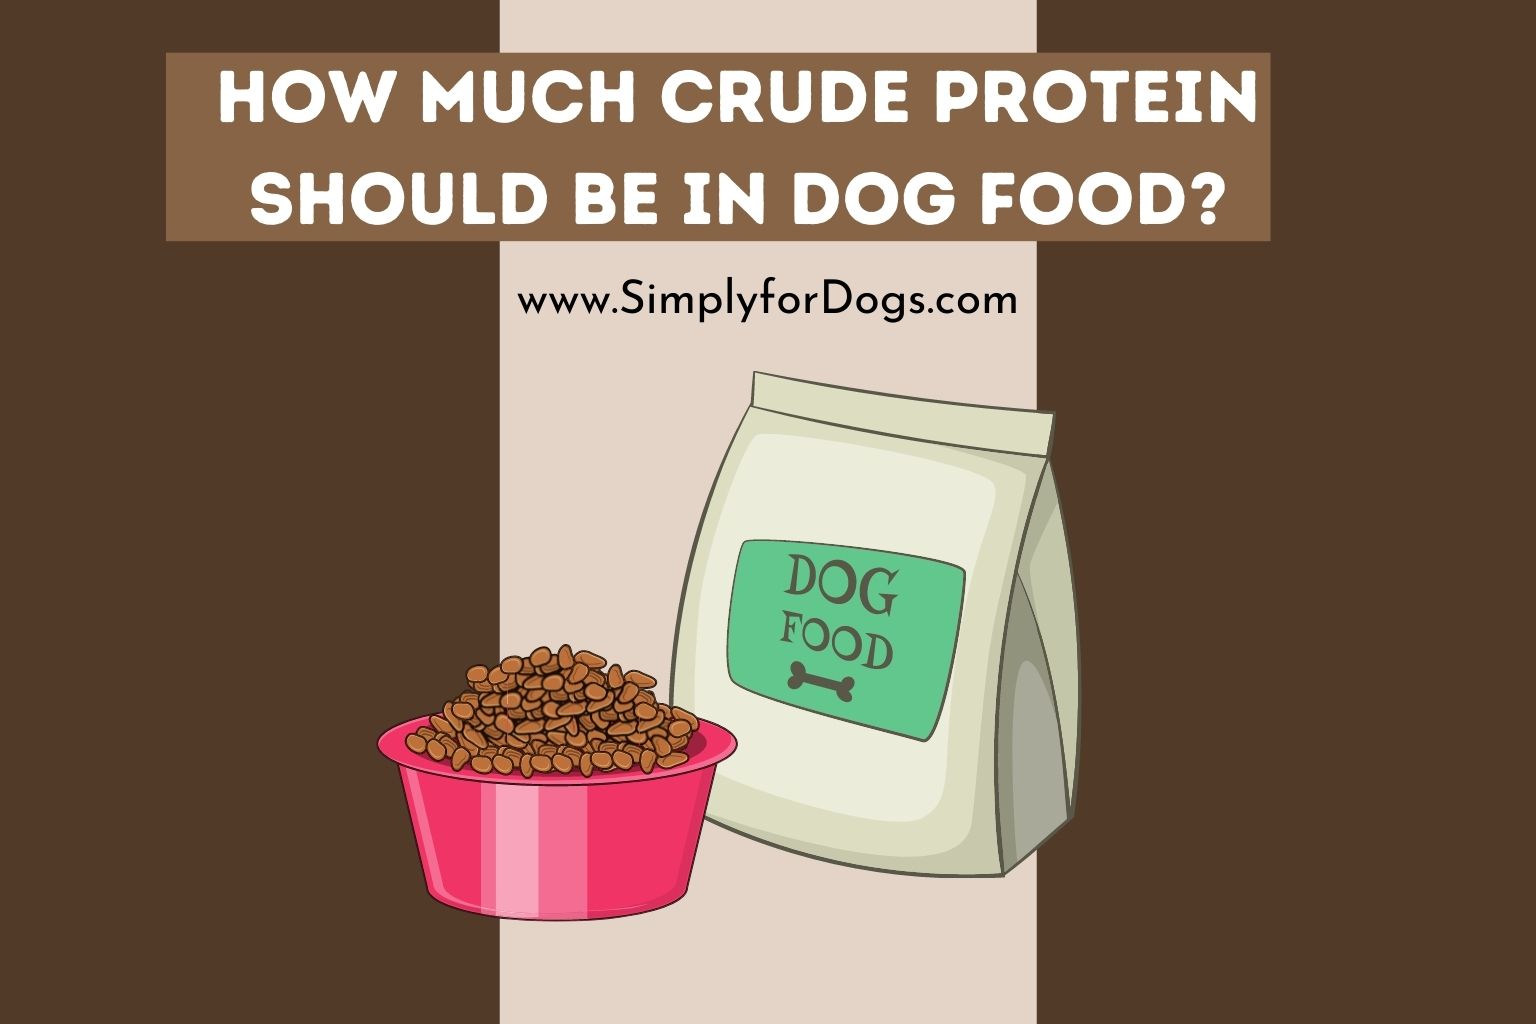 How Much Crude Protein Should be in Dog Food